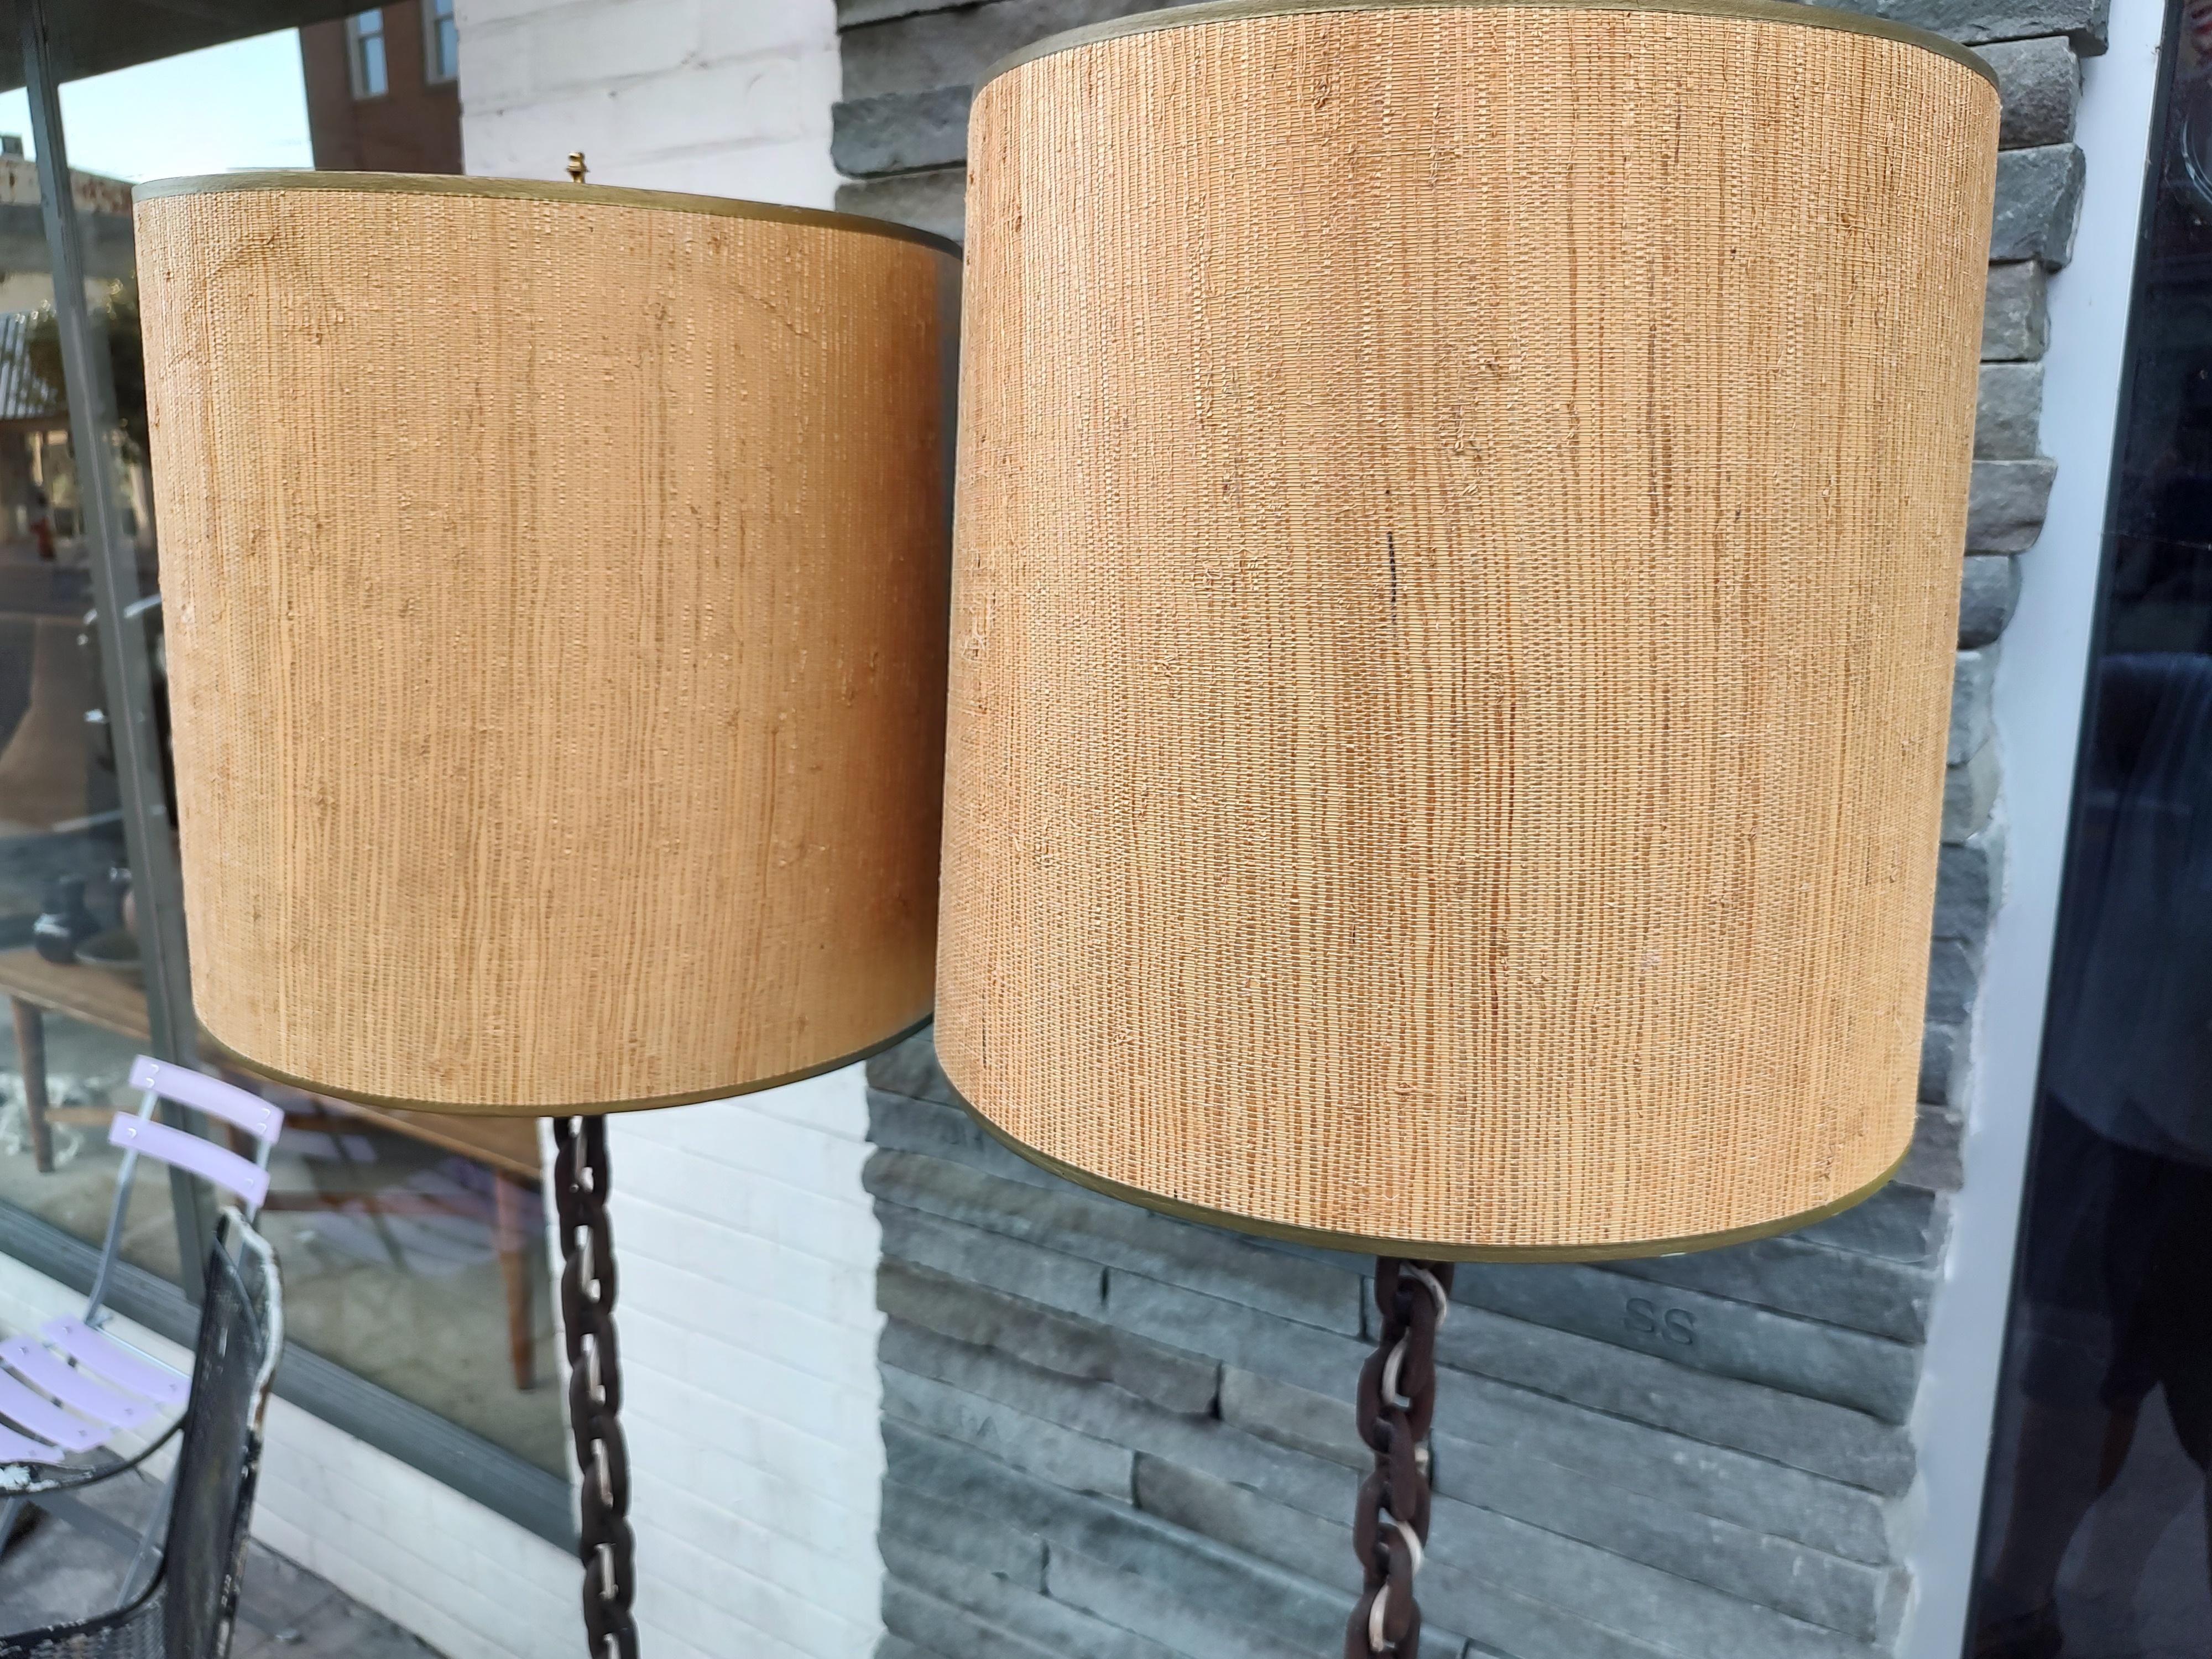 Brass Pair of Mid-Century Modern Sculptural Brutalist Chain Rope Floor Lamps For Sale